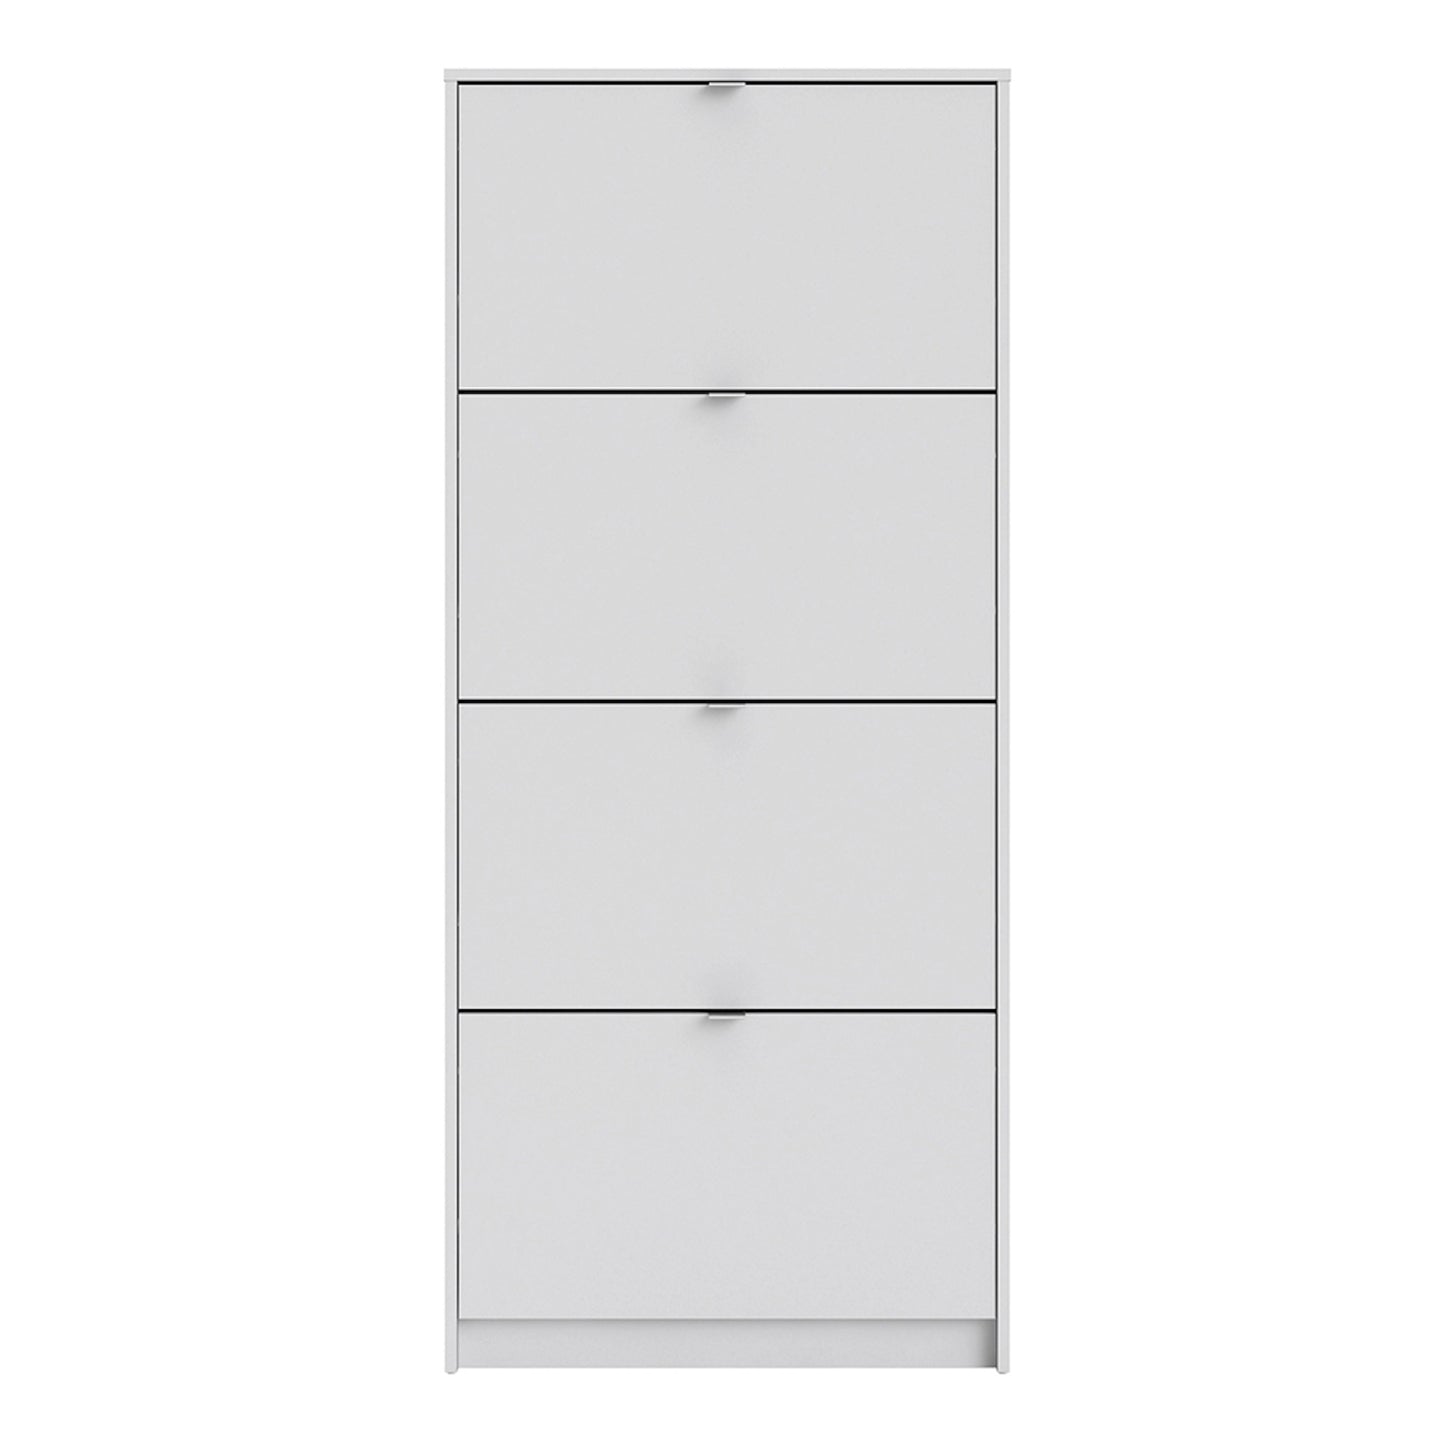 Furniture To Go Shoes Shoe Cabinet W. 4 Tilting Doors & 1 Layer in White